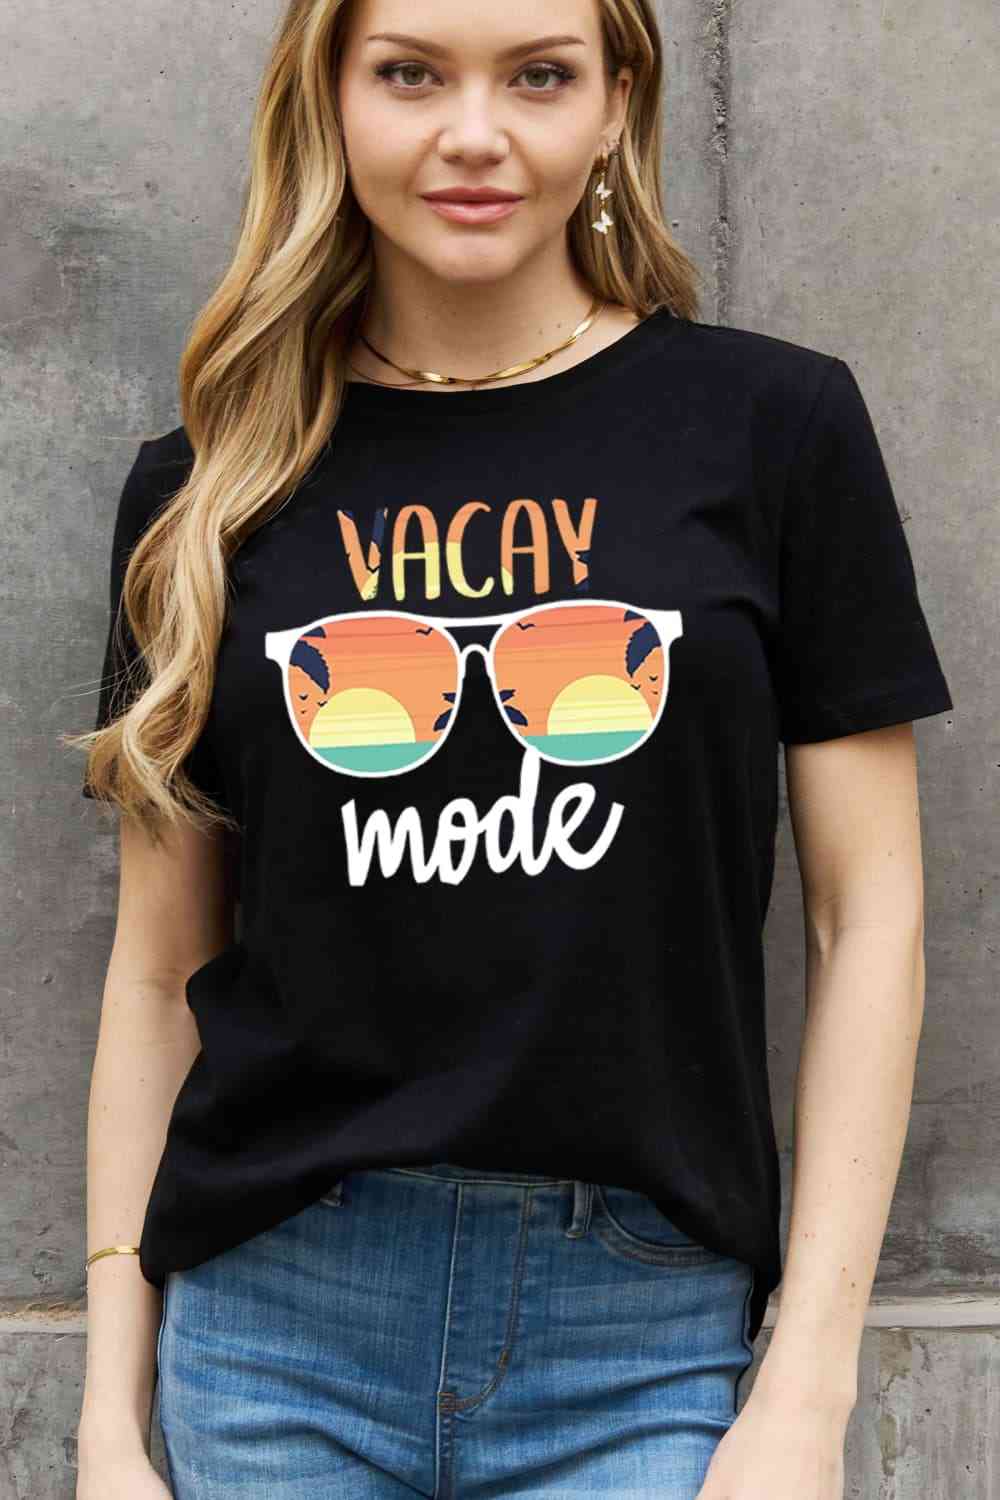 VACAY MODE Graphic Cotton Tee - Black / S - T-Shirts - Shirts & Tops - 1 - 2024